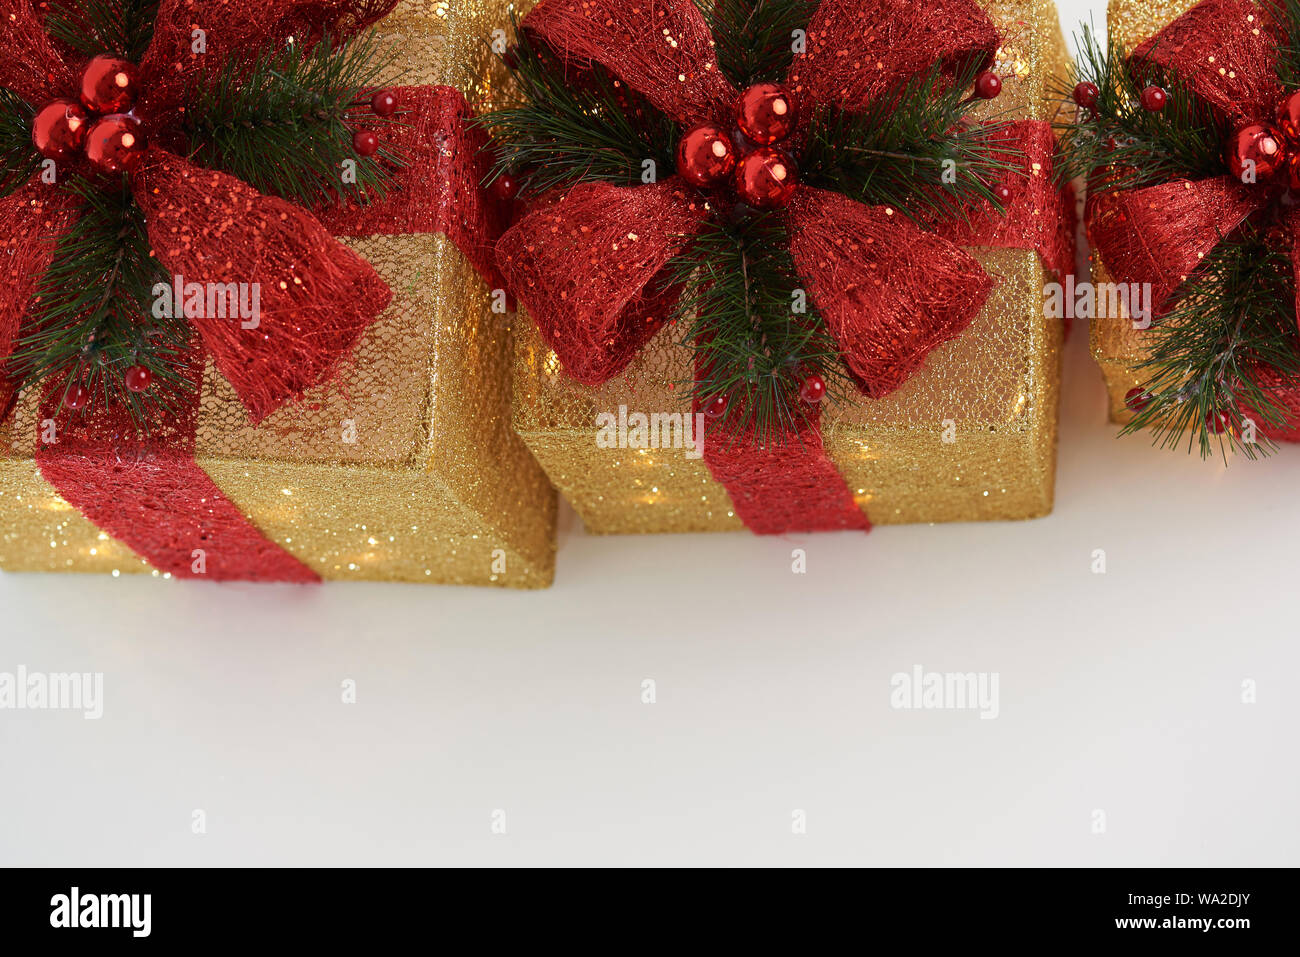 Christmas gifts theme. Gold color presents boxes with red ribbon Stock Photo